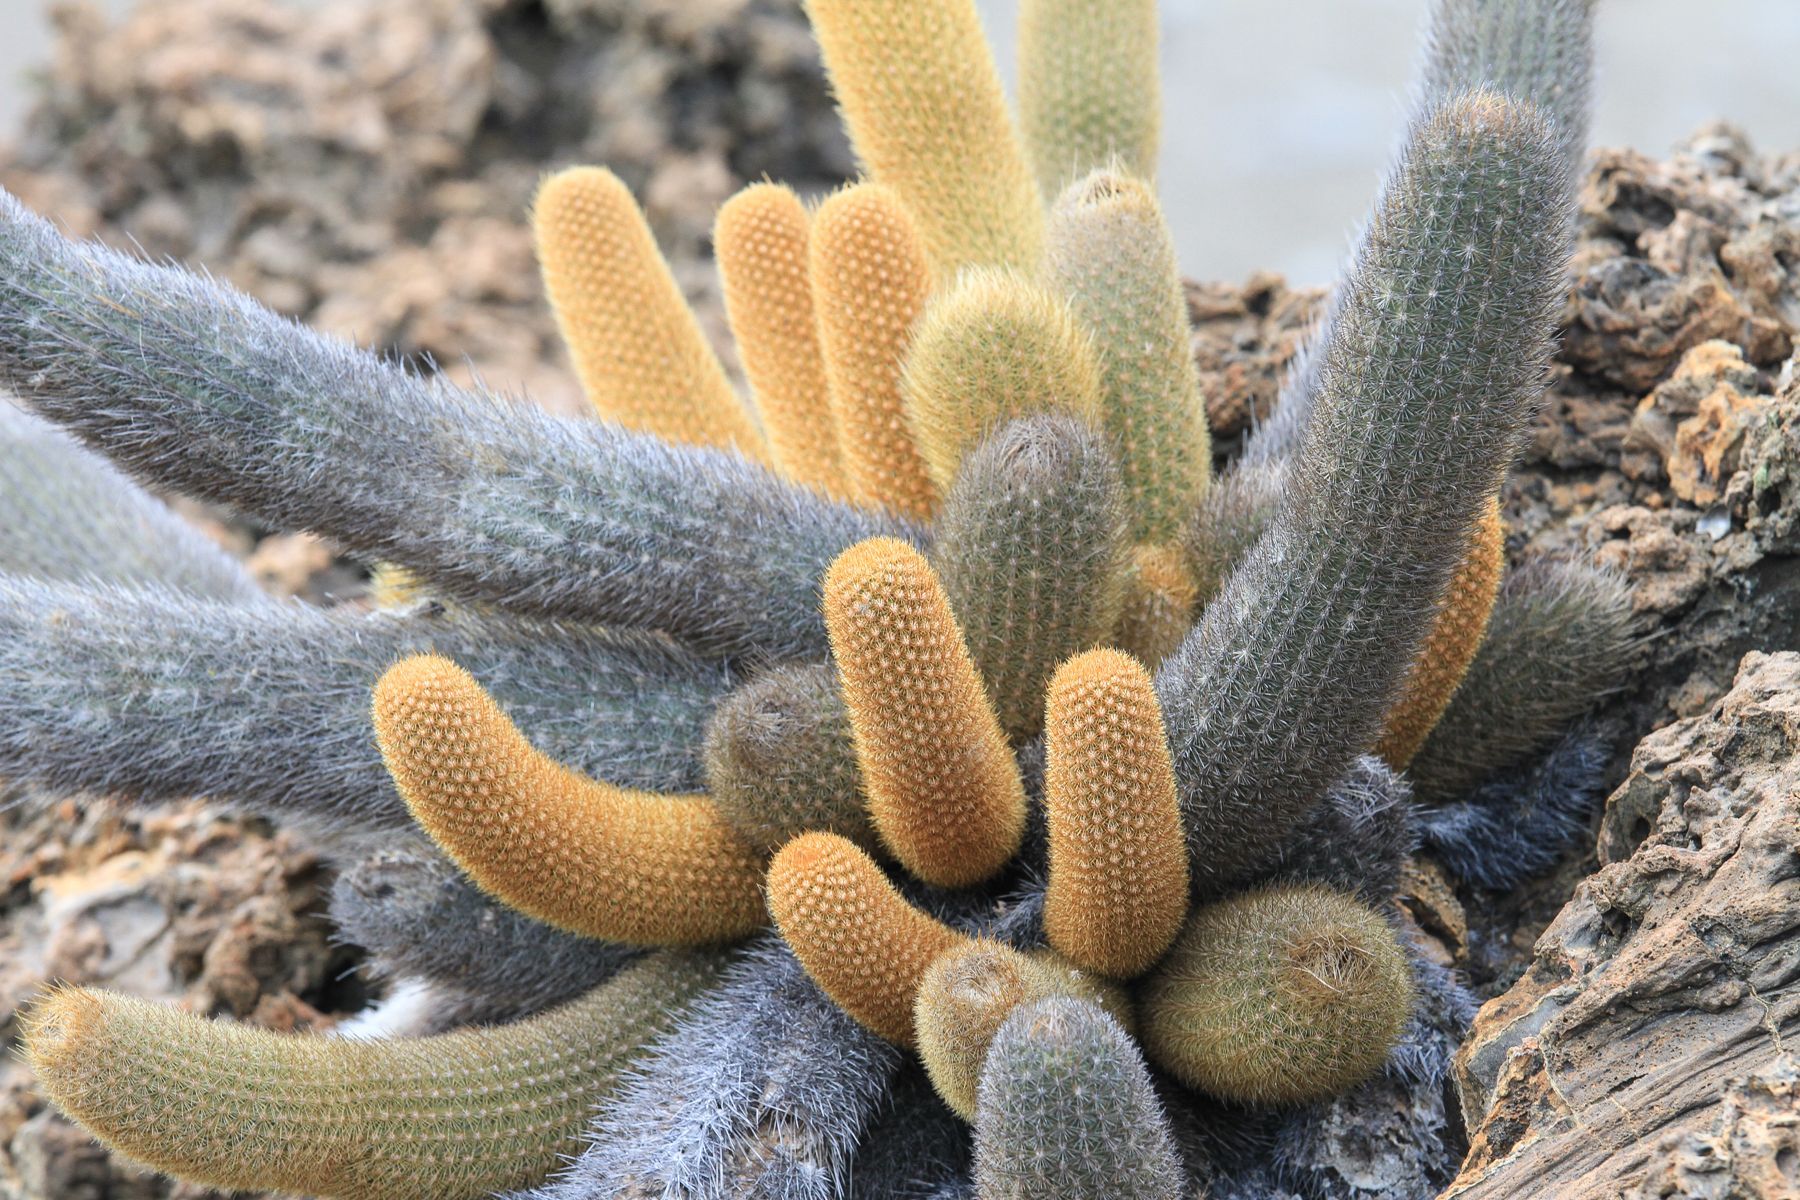 On some islands colourful endemic Brachycereus cacti are to be found